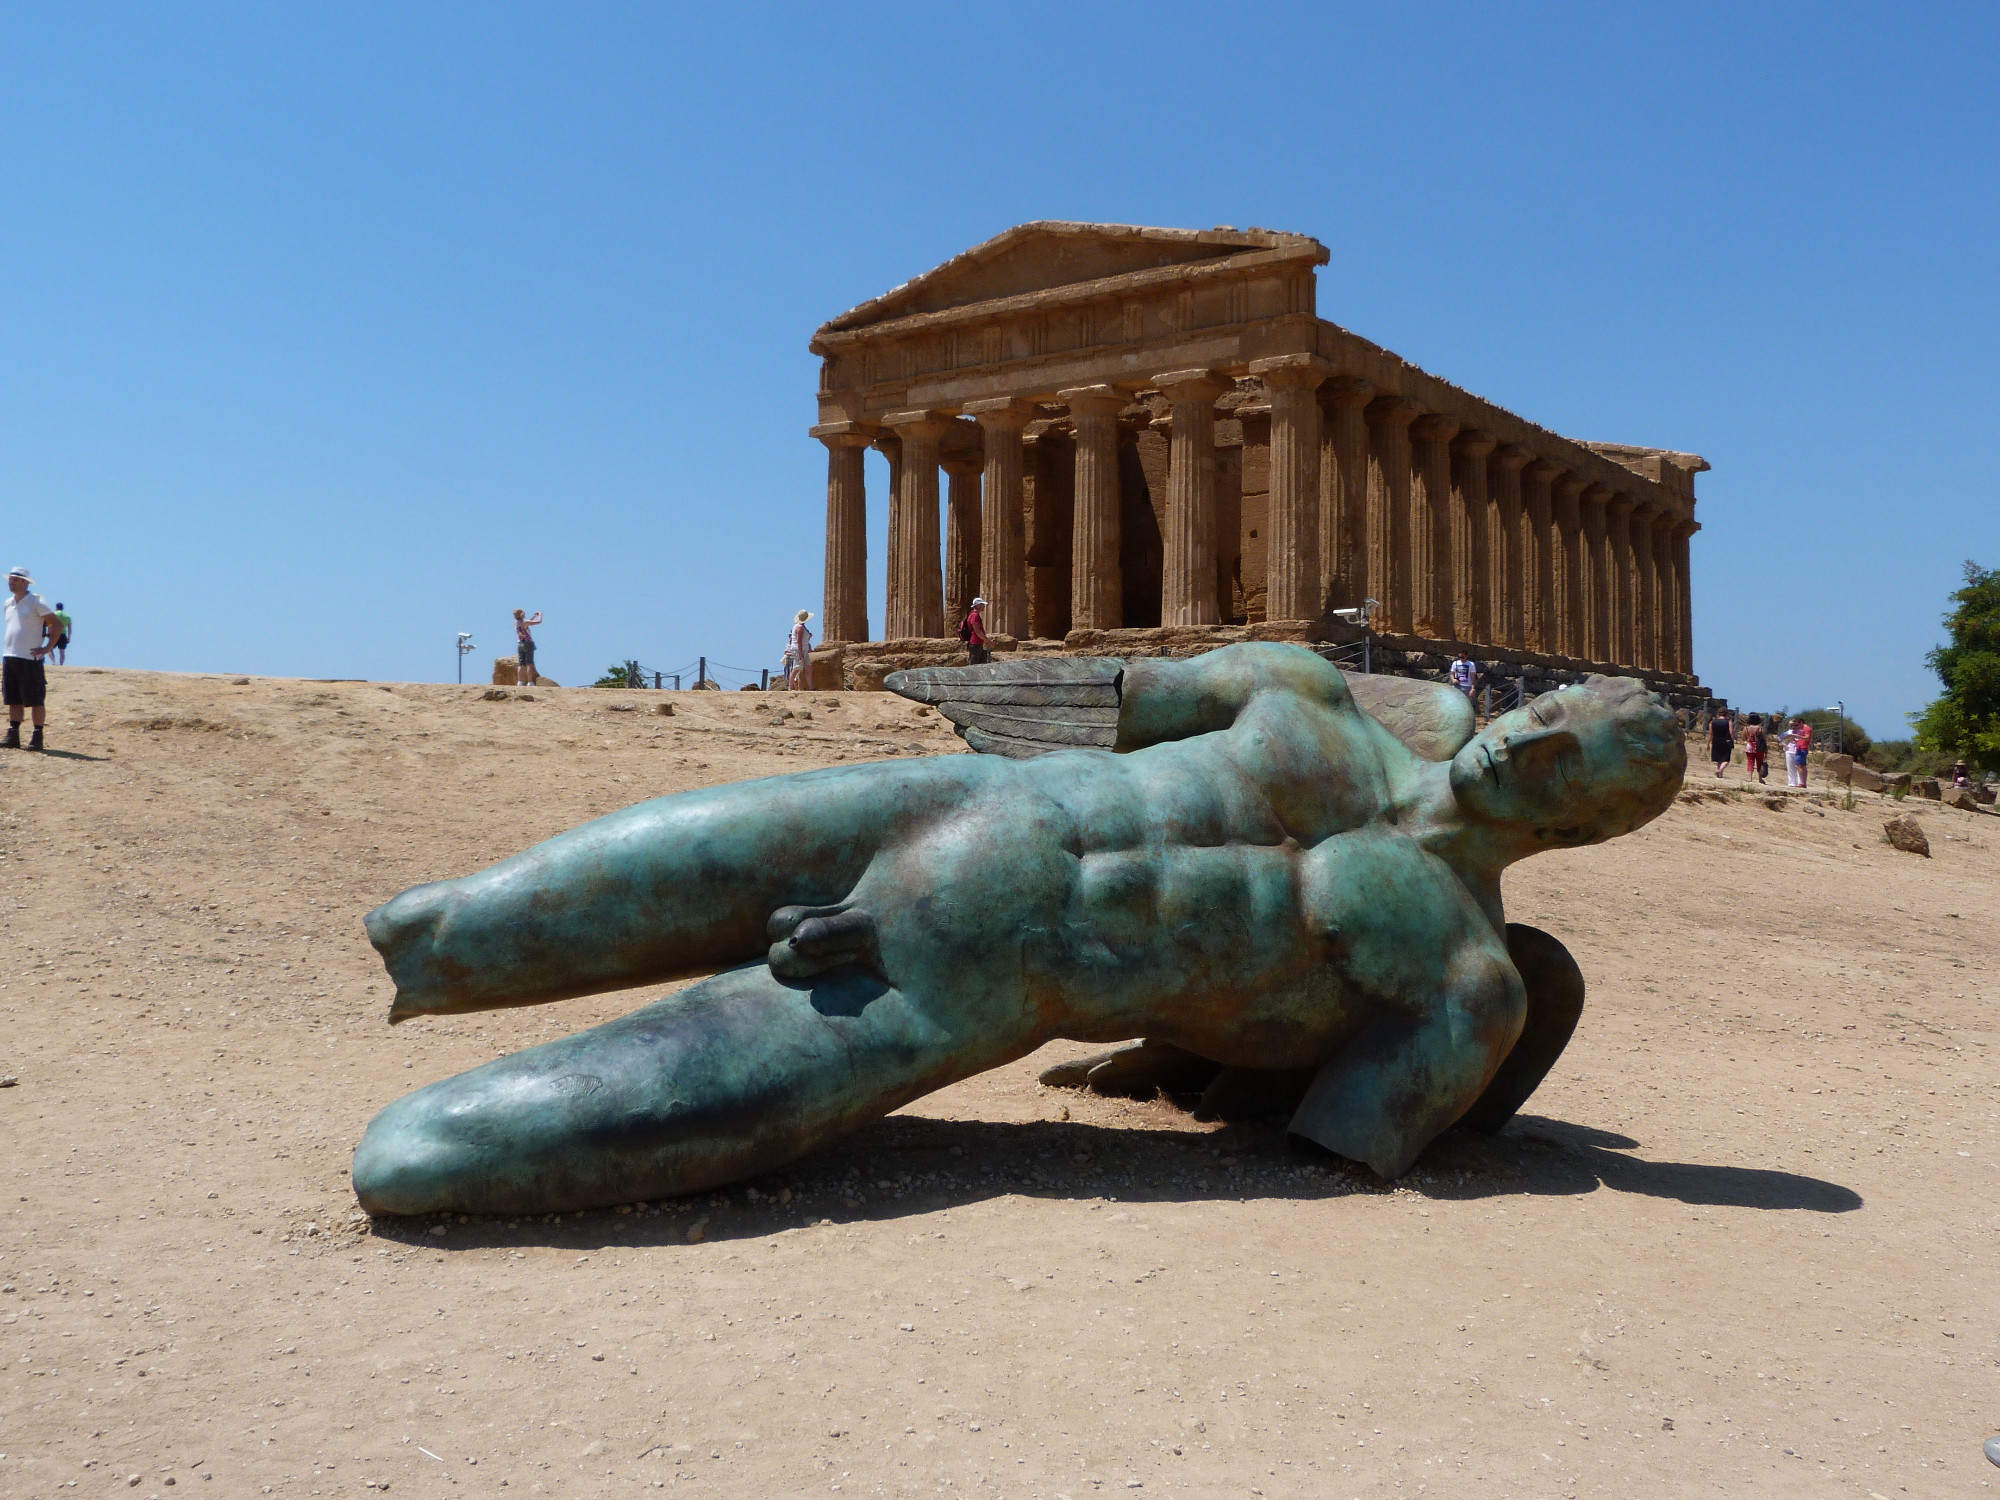 Temple of Concordia and the statue of Fallen Icarus